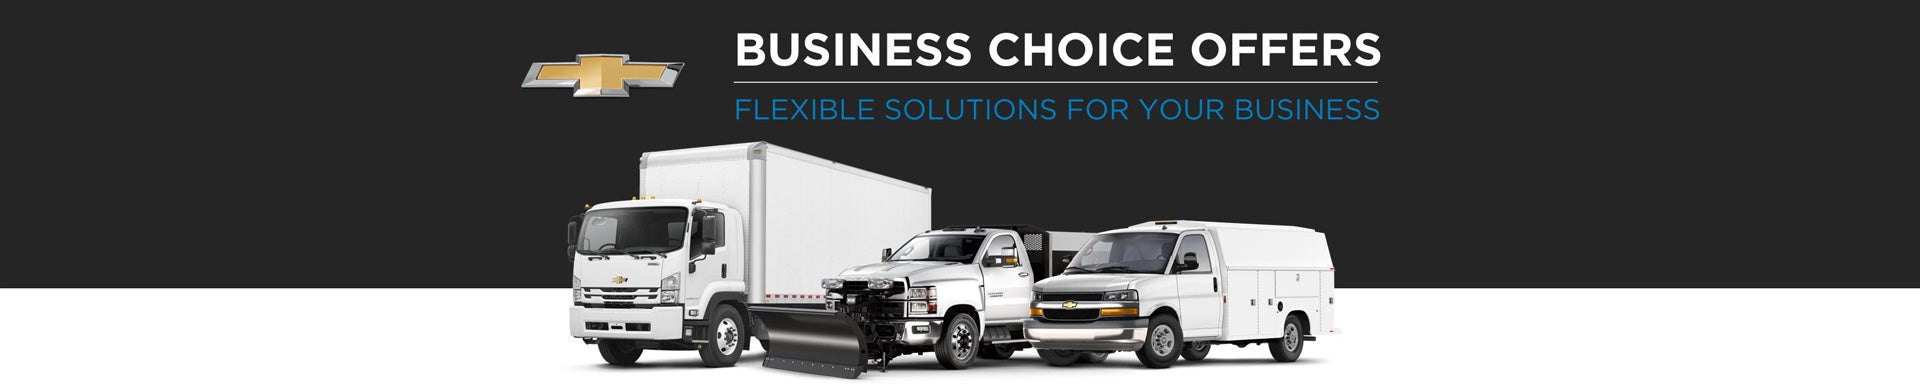 Chevrolet Business Choice Offers - Flexible Solutions for your Business - Jim Shorkey Murrysville Chevrolet in Murrysville PA